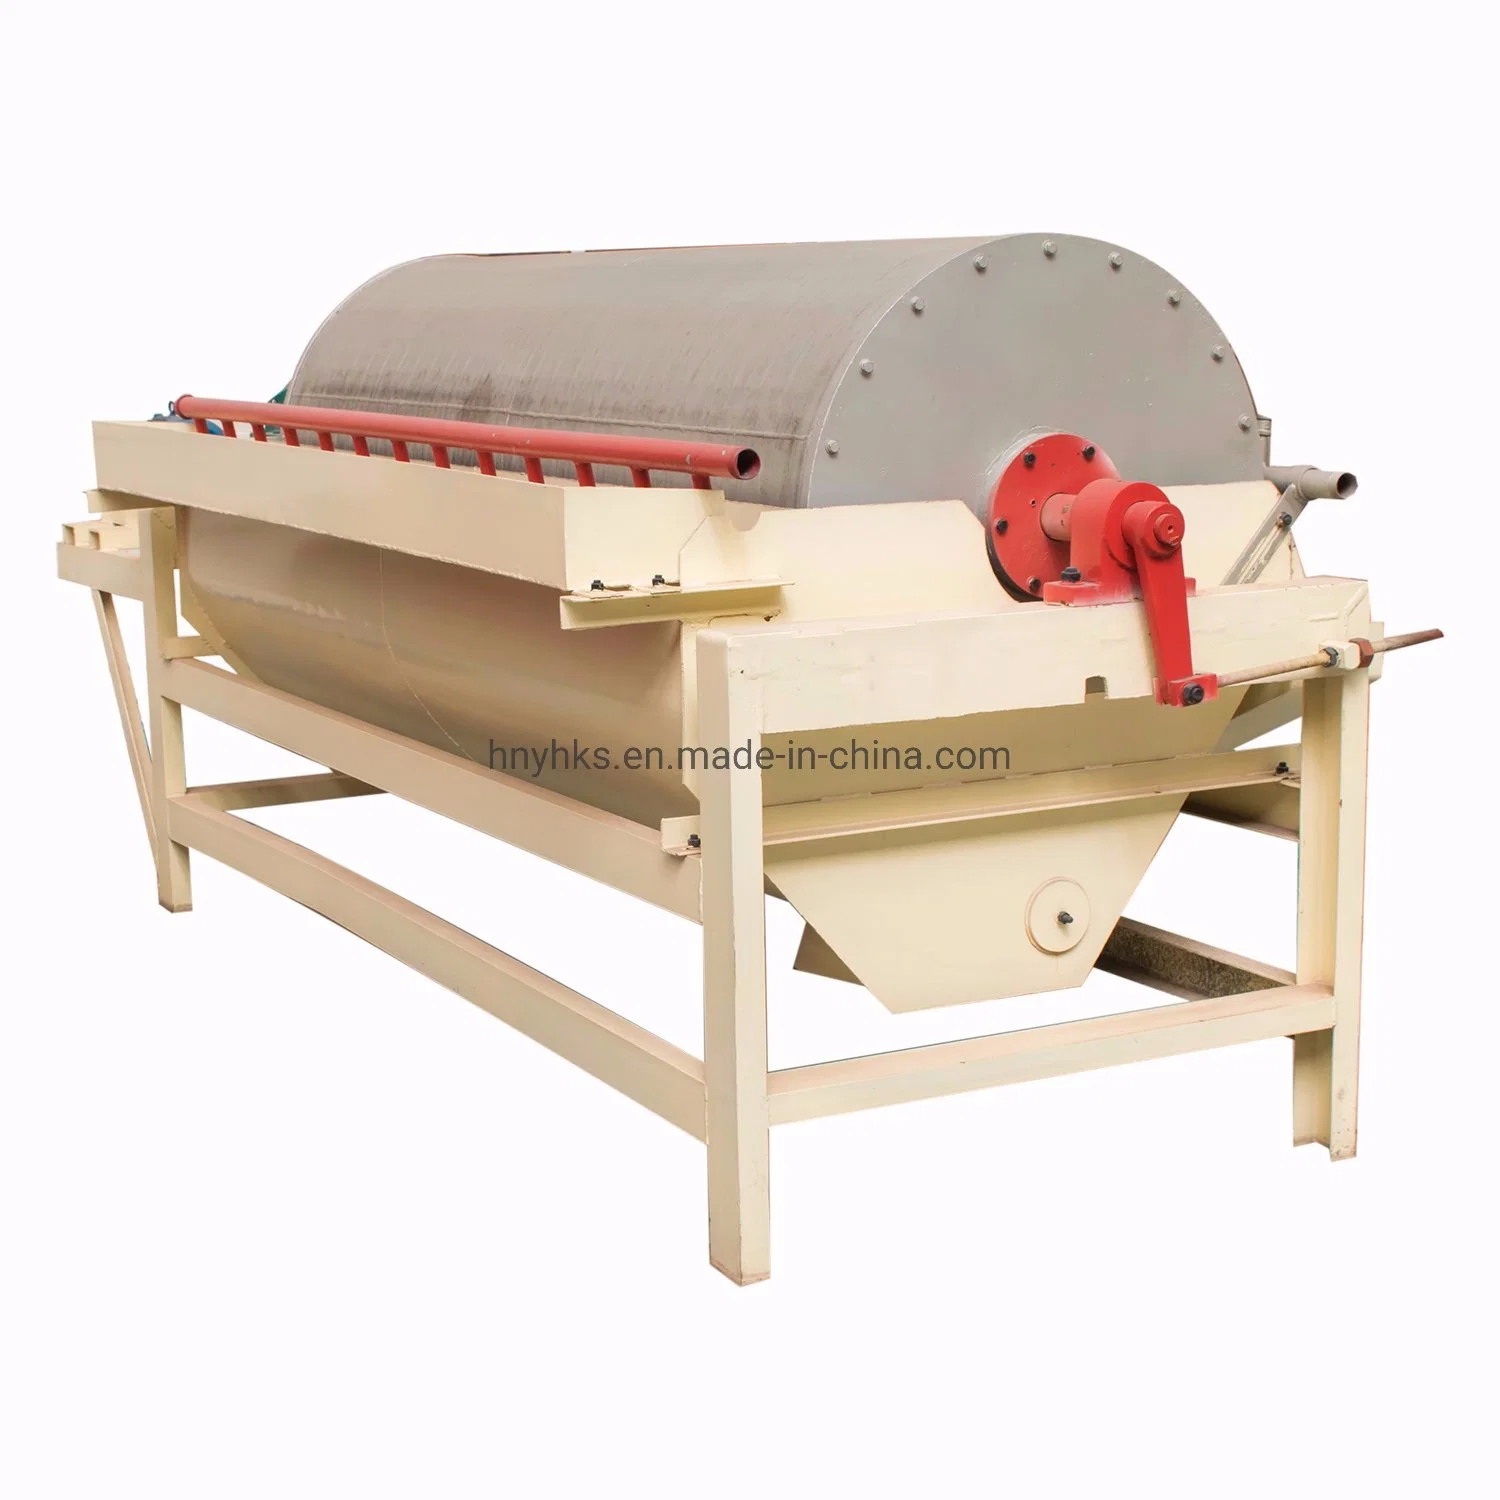 Gold Mining Equipment of Iron Drum Magnetic Separator for Iron Minerals Separation